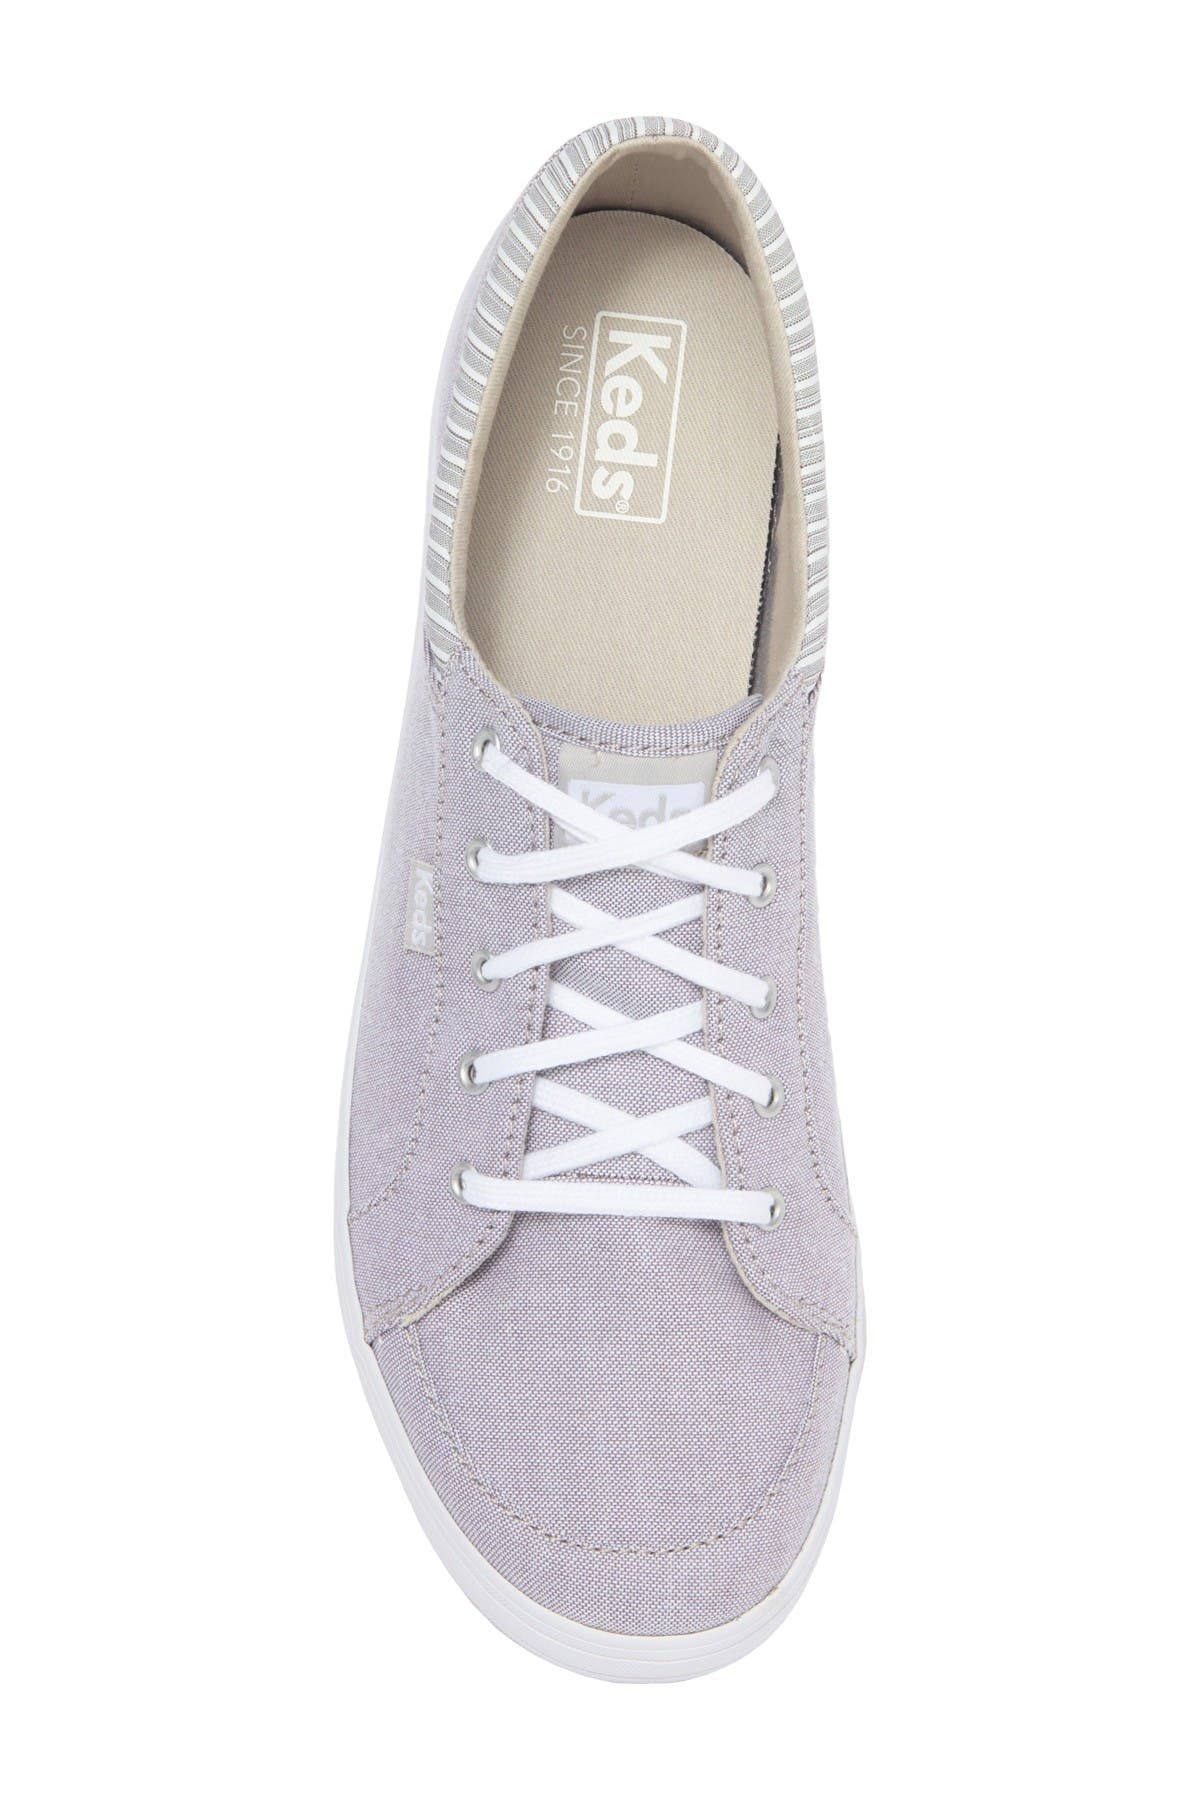 keds tour chambray sneakers